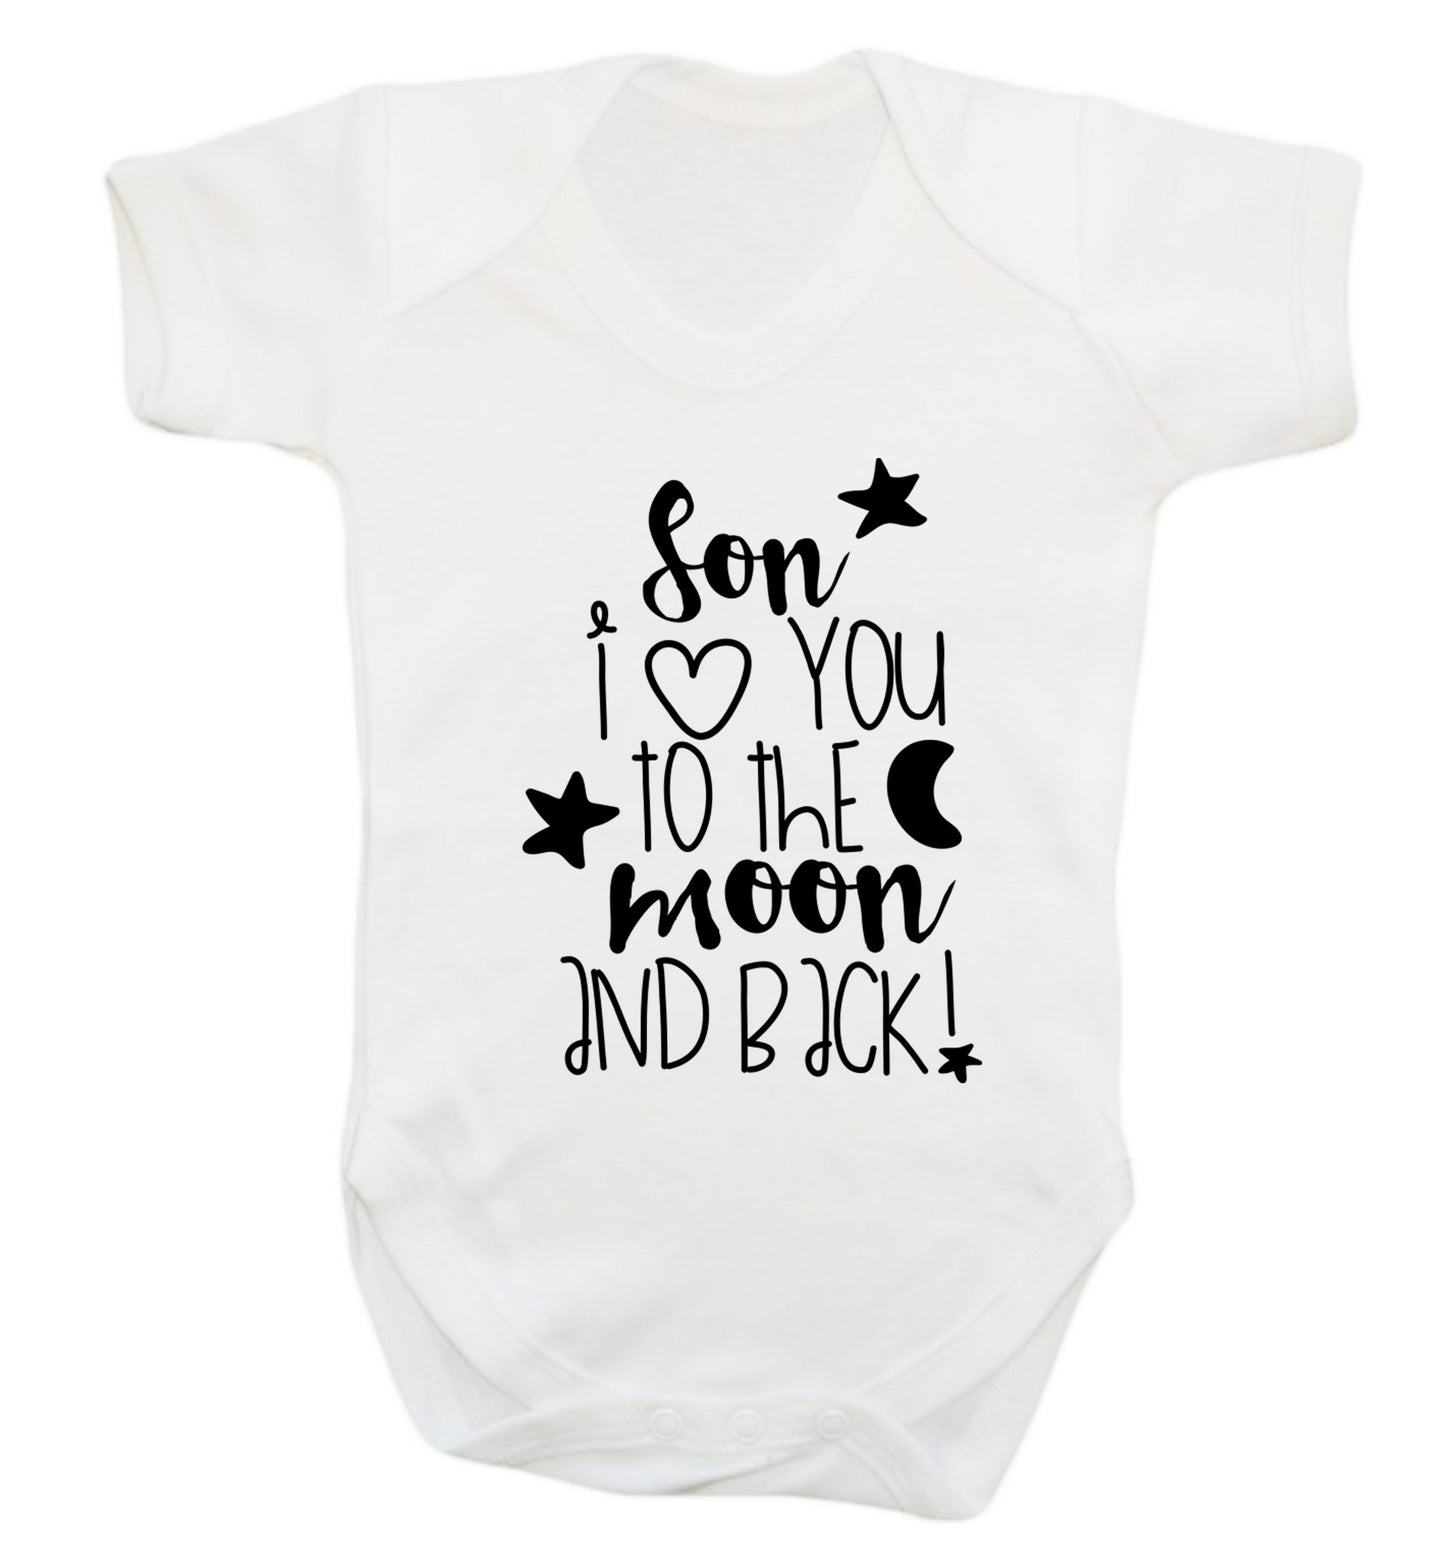 Son I love you to the moon and back Baby Vest white 18-24 months